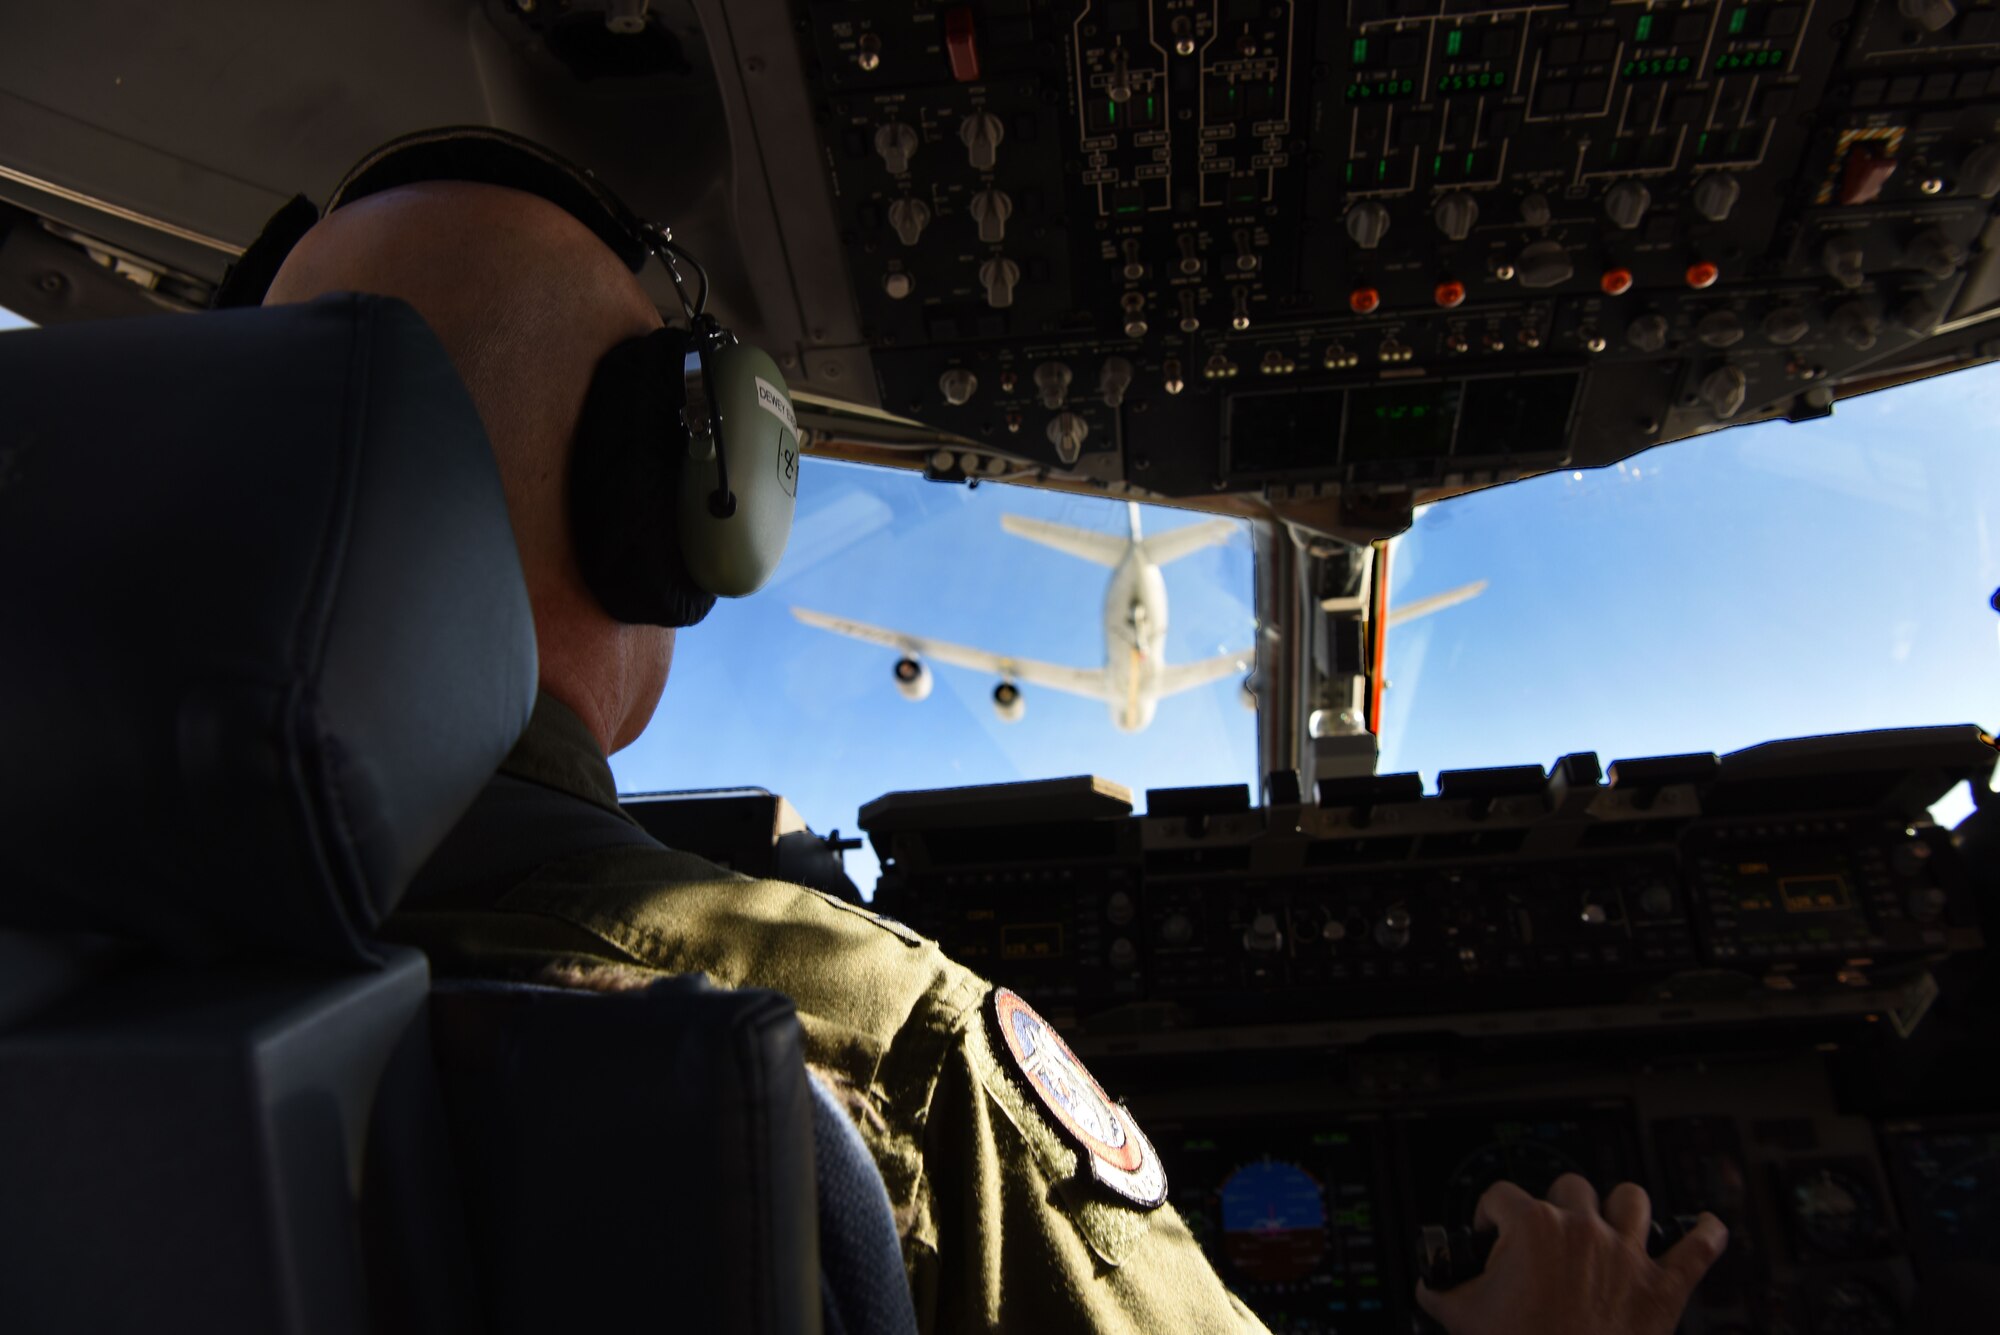 Gen. Carlton D. Everhart II, Air Mobility Command commander, moves C-17 Globemaster III into pre-contact position during an air refueling near Joint Base Lewis-McChord, Wash., Jan. 25, 2018. The C-17 is what gives McChord Field its capability for readiness. (U.S. Air Force photo by Senior Airman Tryphena Mayhugh)